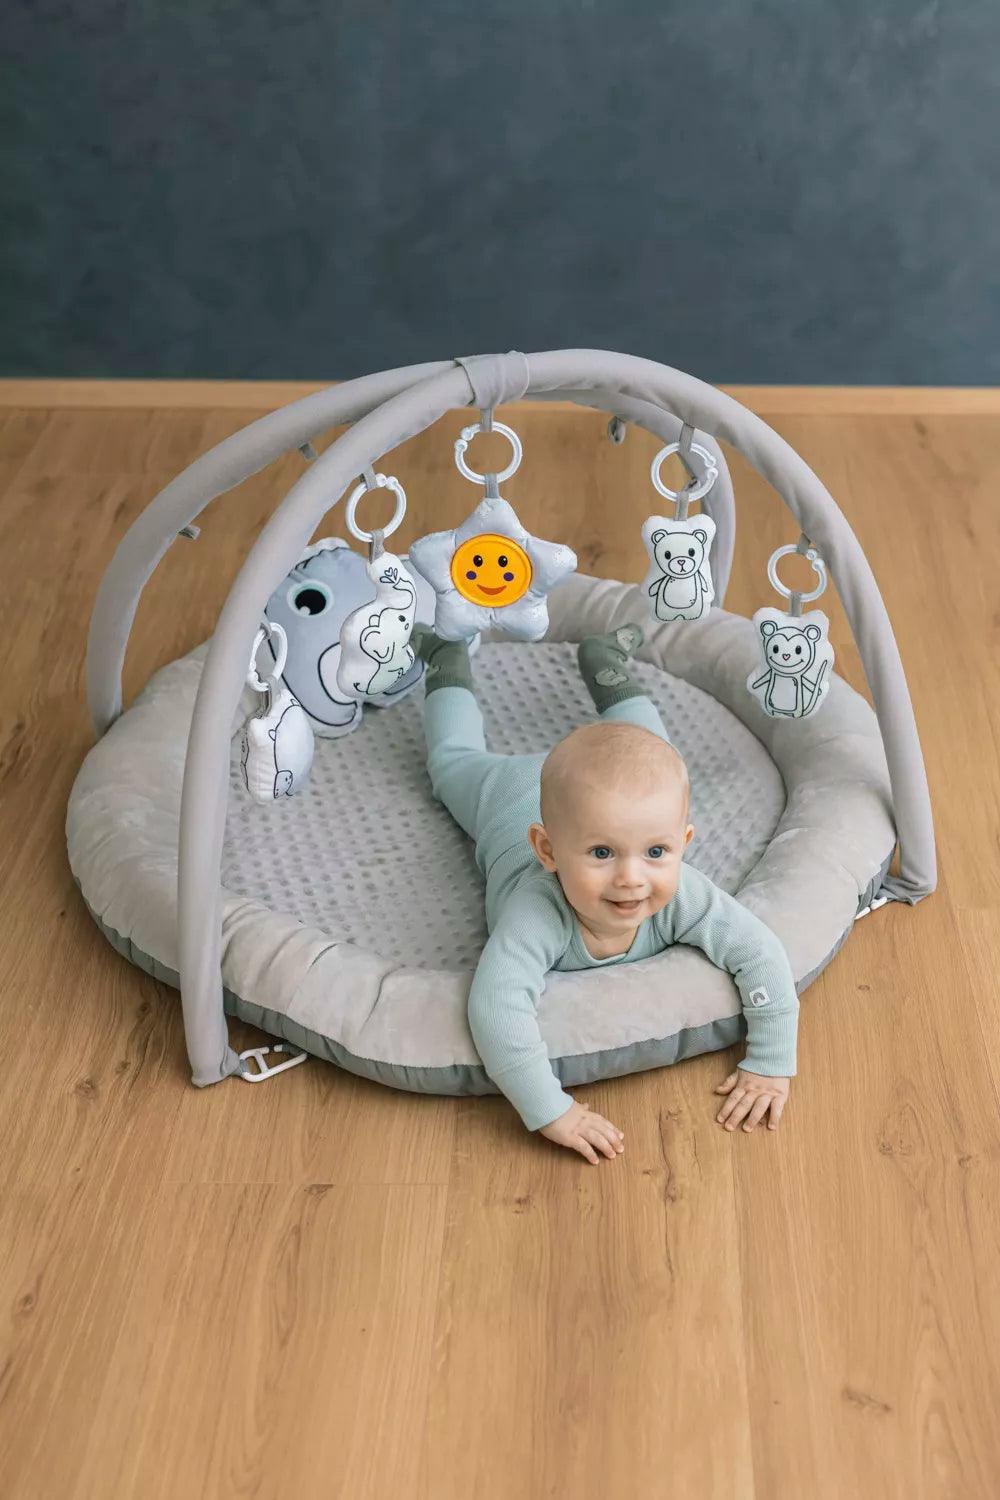 Shop the Activity Play Mat from Done by Deer